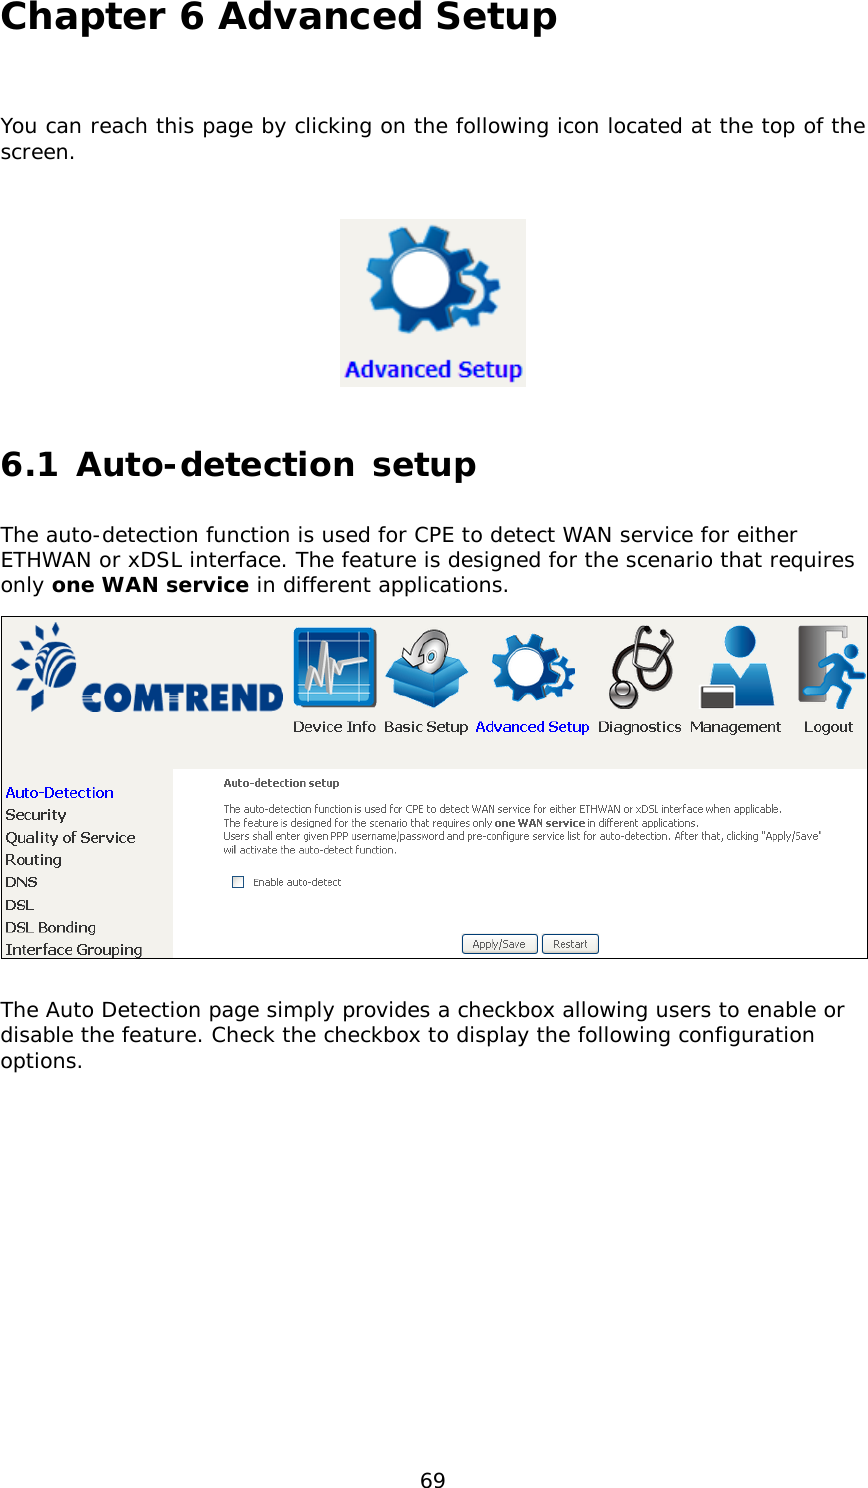  69 Chapter 6 Advanced Setup  You can reach this page by clicking on the following icon located at the top of the screen.  6.1 Auto-detection setup The auto-detection function is used for CPE to detect WAN service for either ETHWAN or xDSL interface. The feature is designed for the scenario that requires only one WAN service in different applications.   The Auto Detection page simply provides a checkbox allowing users to enable or disable the feature. Check the checkbox to display the following configuration options.            